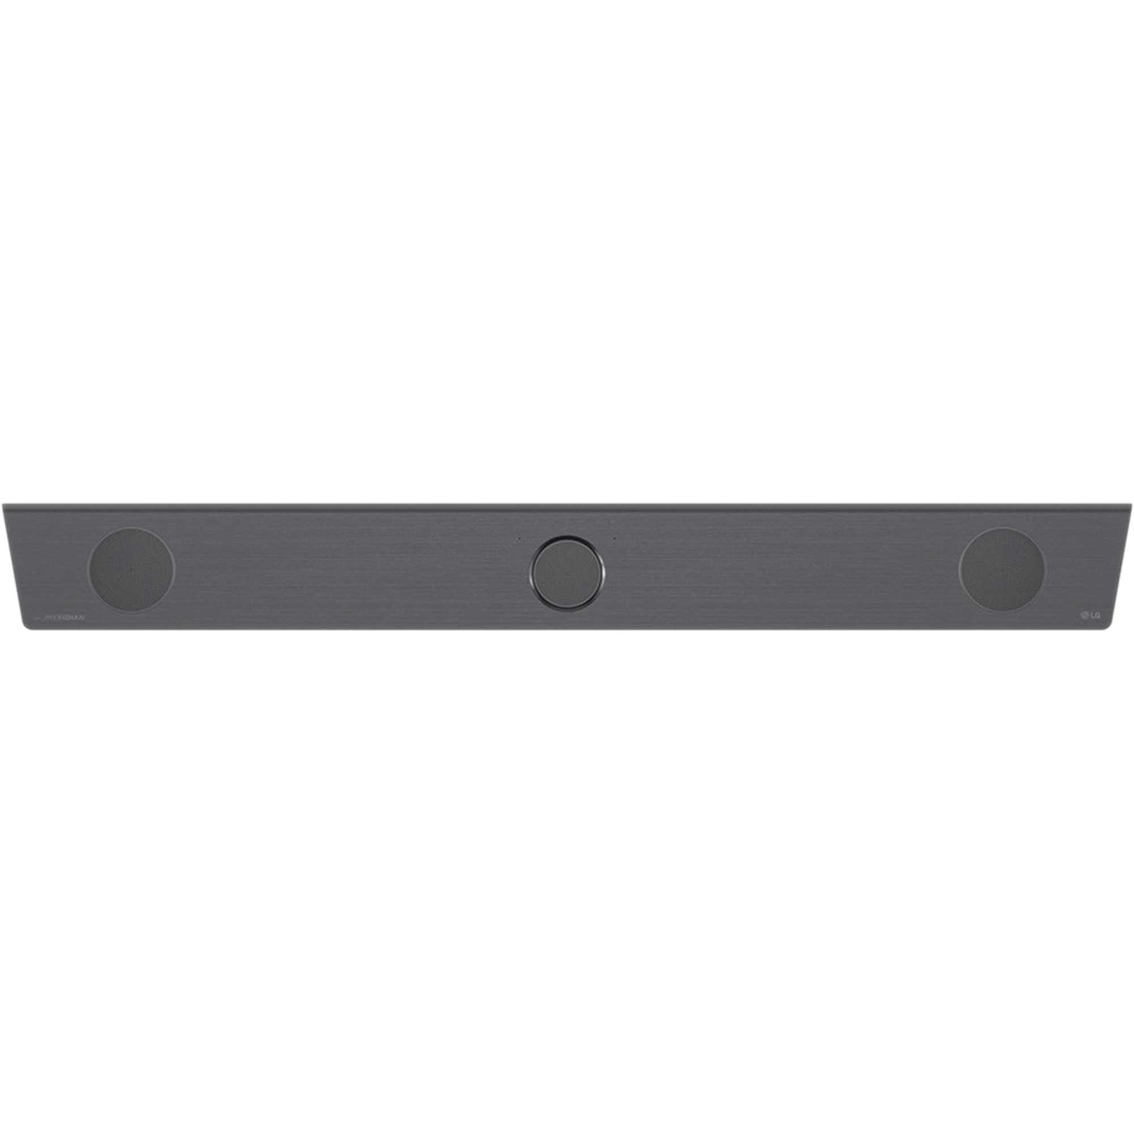 LG S95QR 9.1.5 Ch. 810W High Res Audio Sound Bar and Rear Surround Speakers - Image 6 of 10